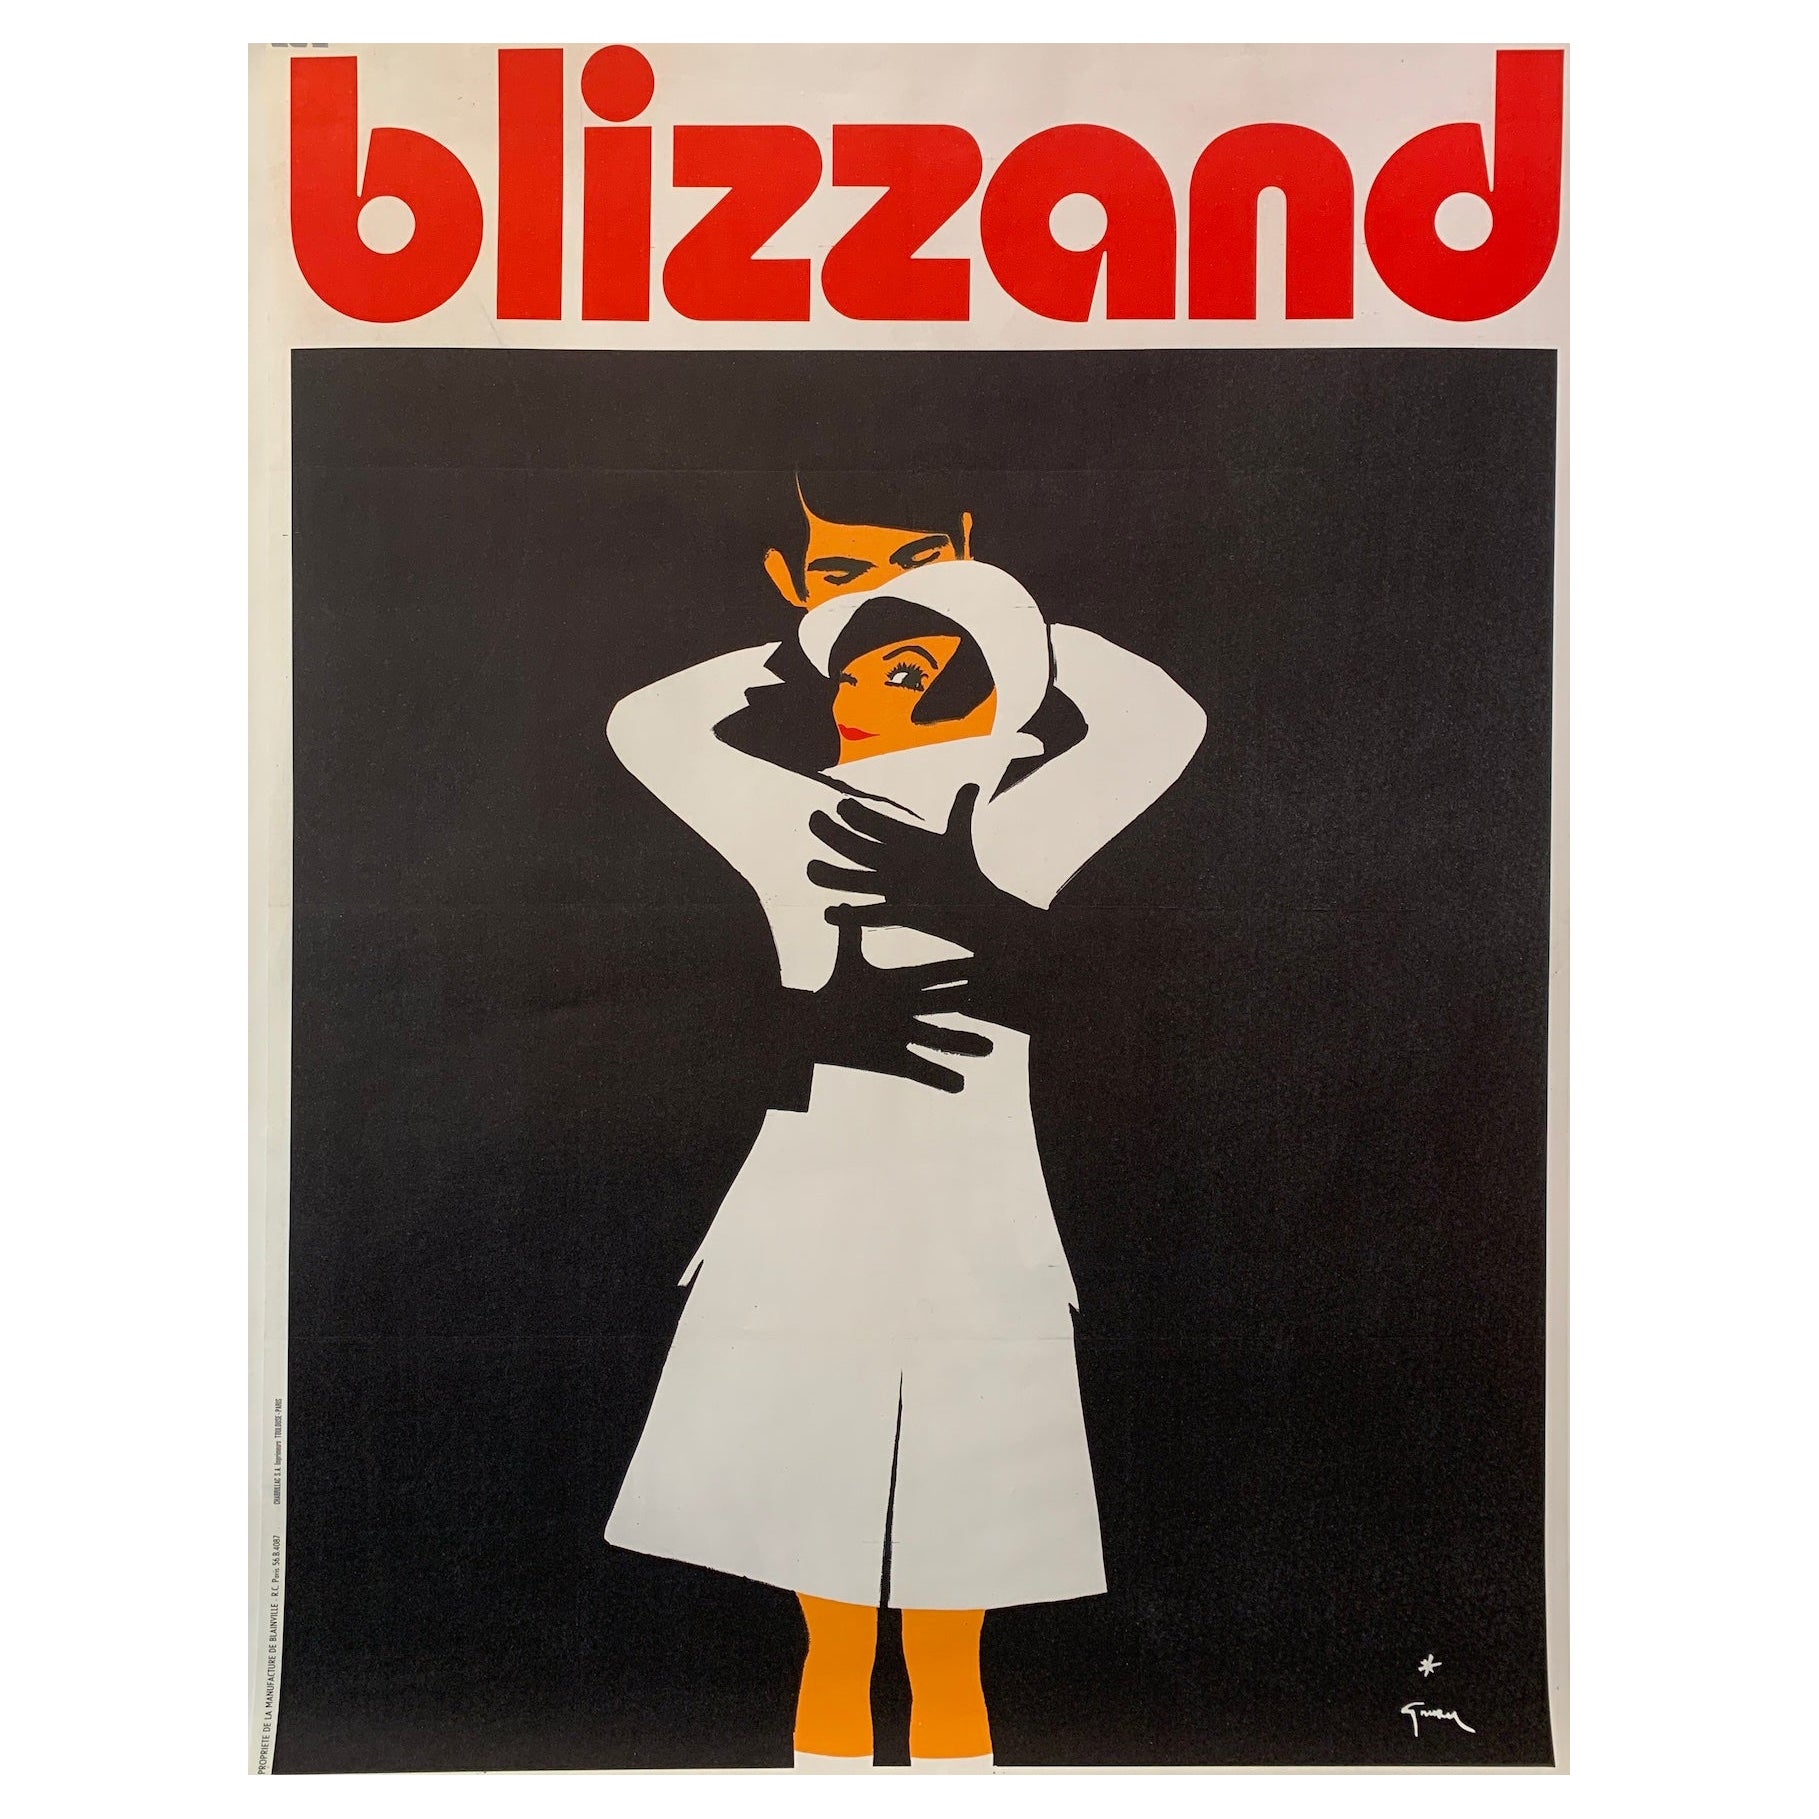 'BLIZZAND EMBRACE' Original Vintage Advertising Poster c. 1968 by GRUAU For Sale